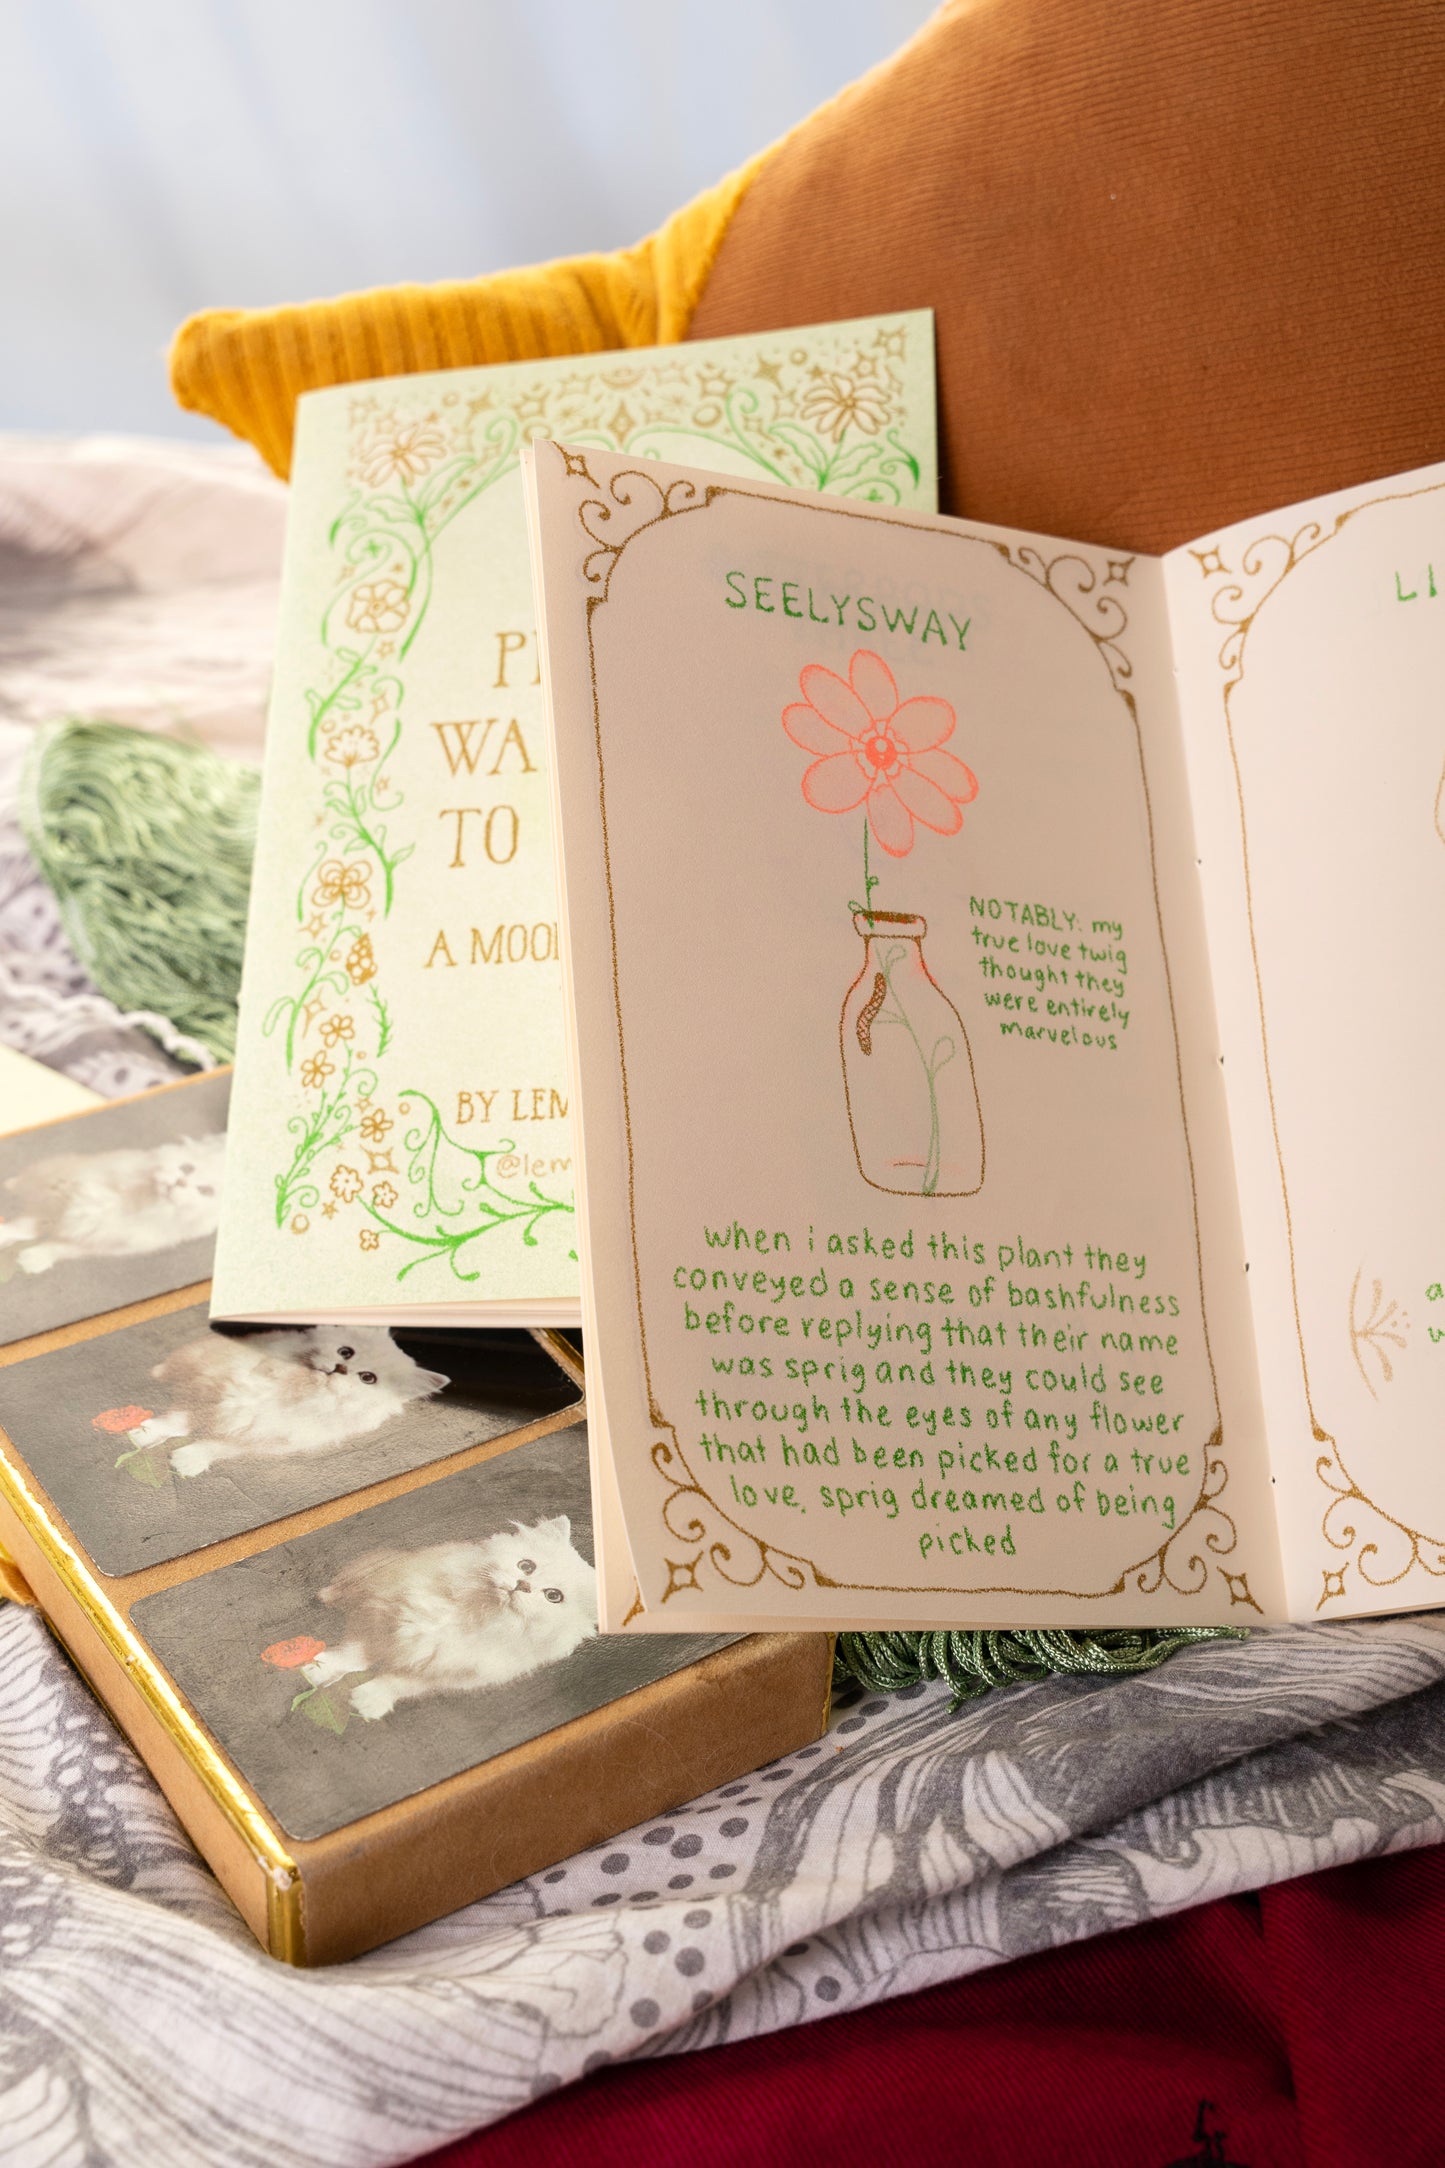 preorder: the plants want you to know: a moonfolk relic vol. 1 zine